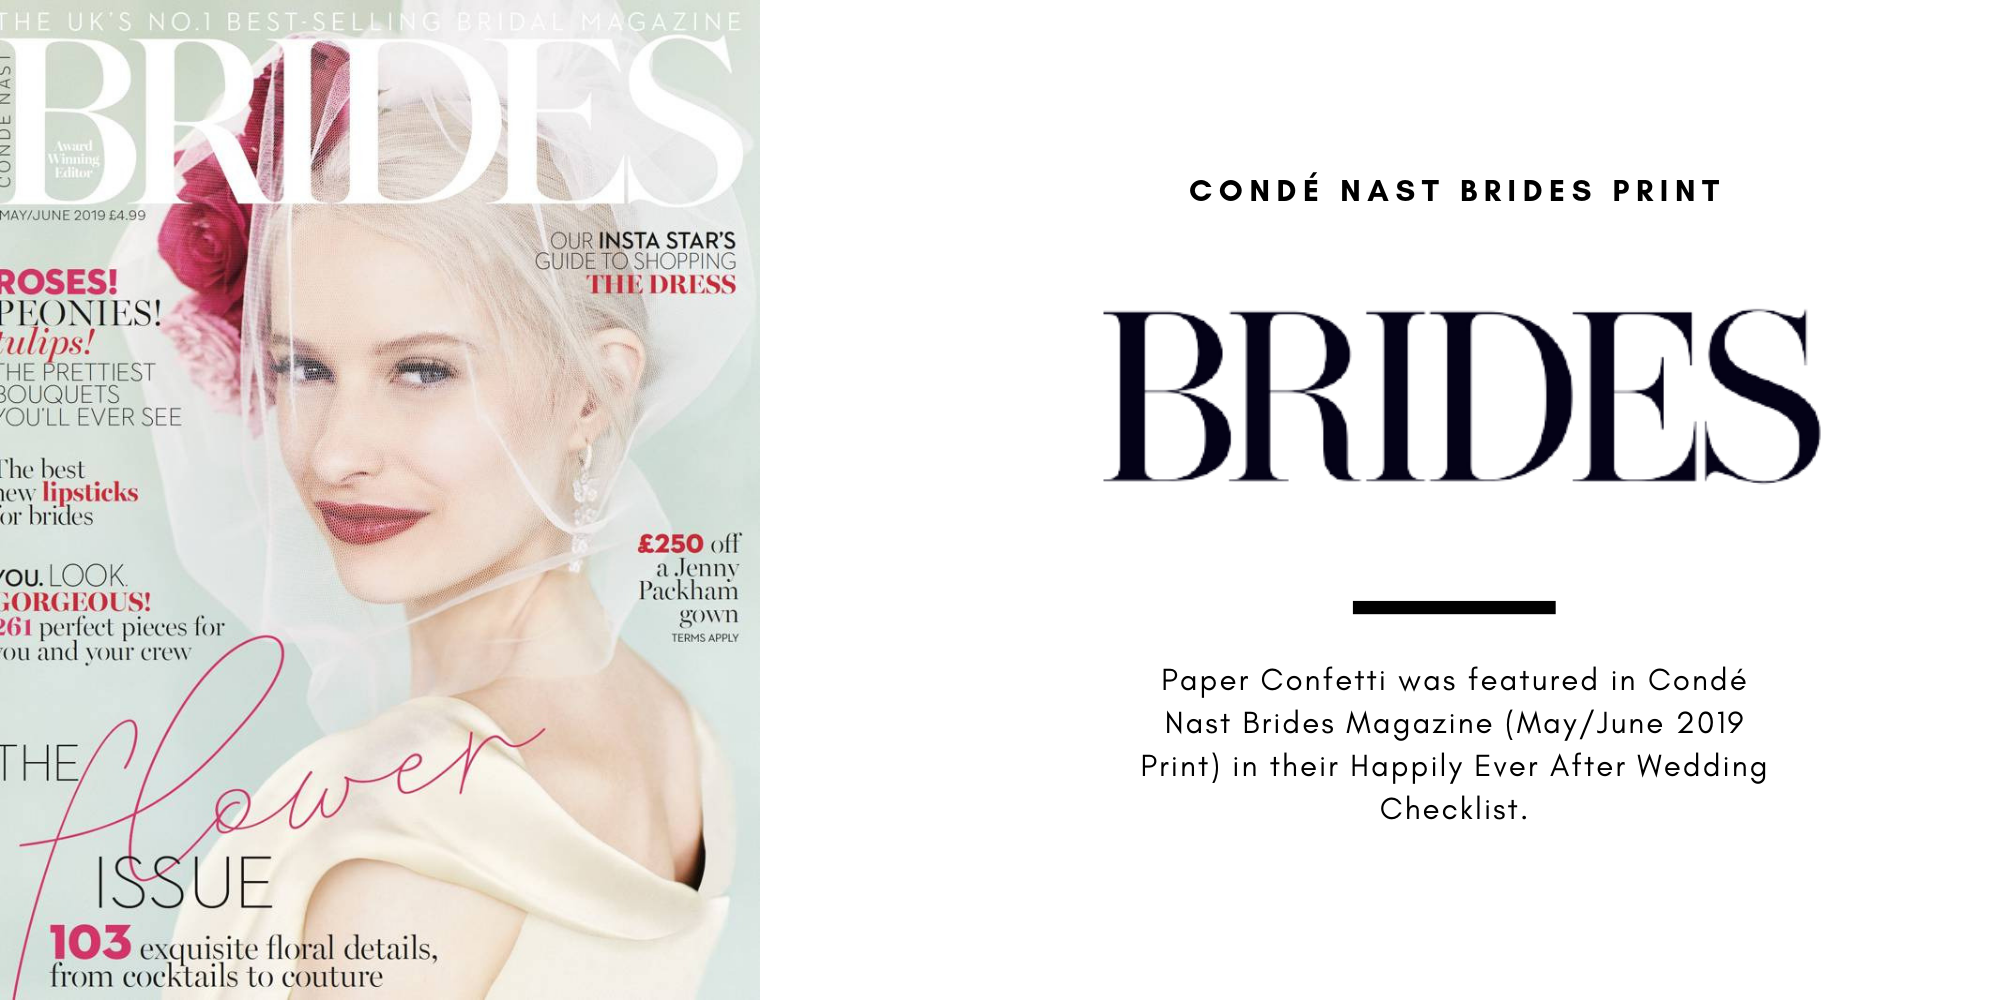 Paper Confetti was featured in Condé Nast Brides "Happy Ever After Wedding Checklist in their May/June Print Magazine for our exclusive customizable rose gold champagne bottle balloons. 